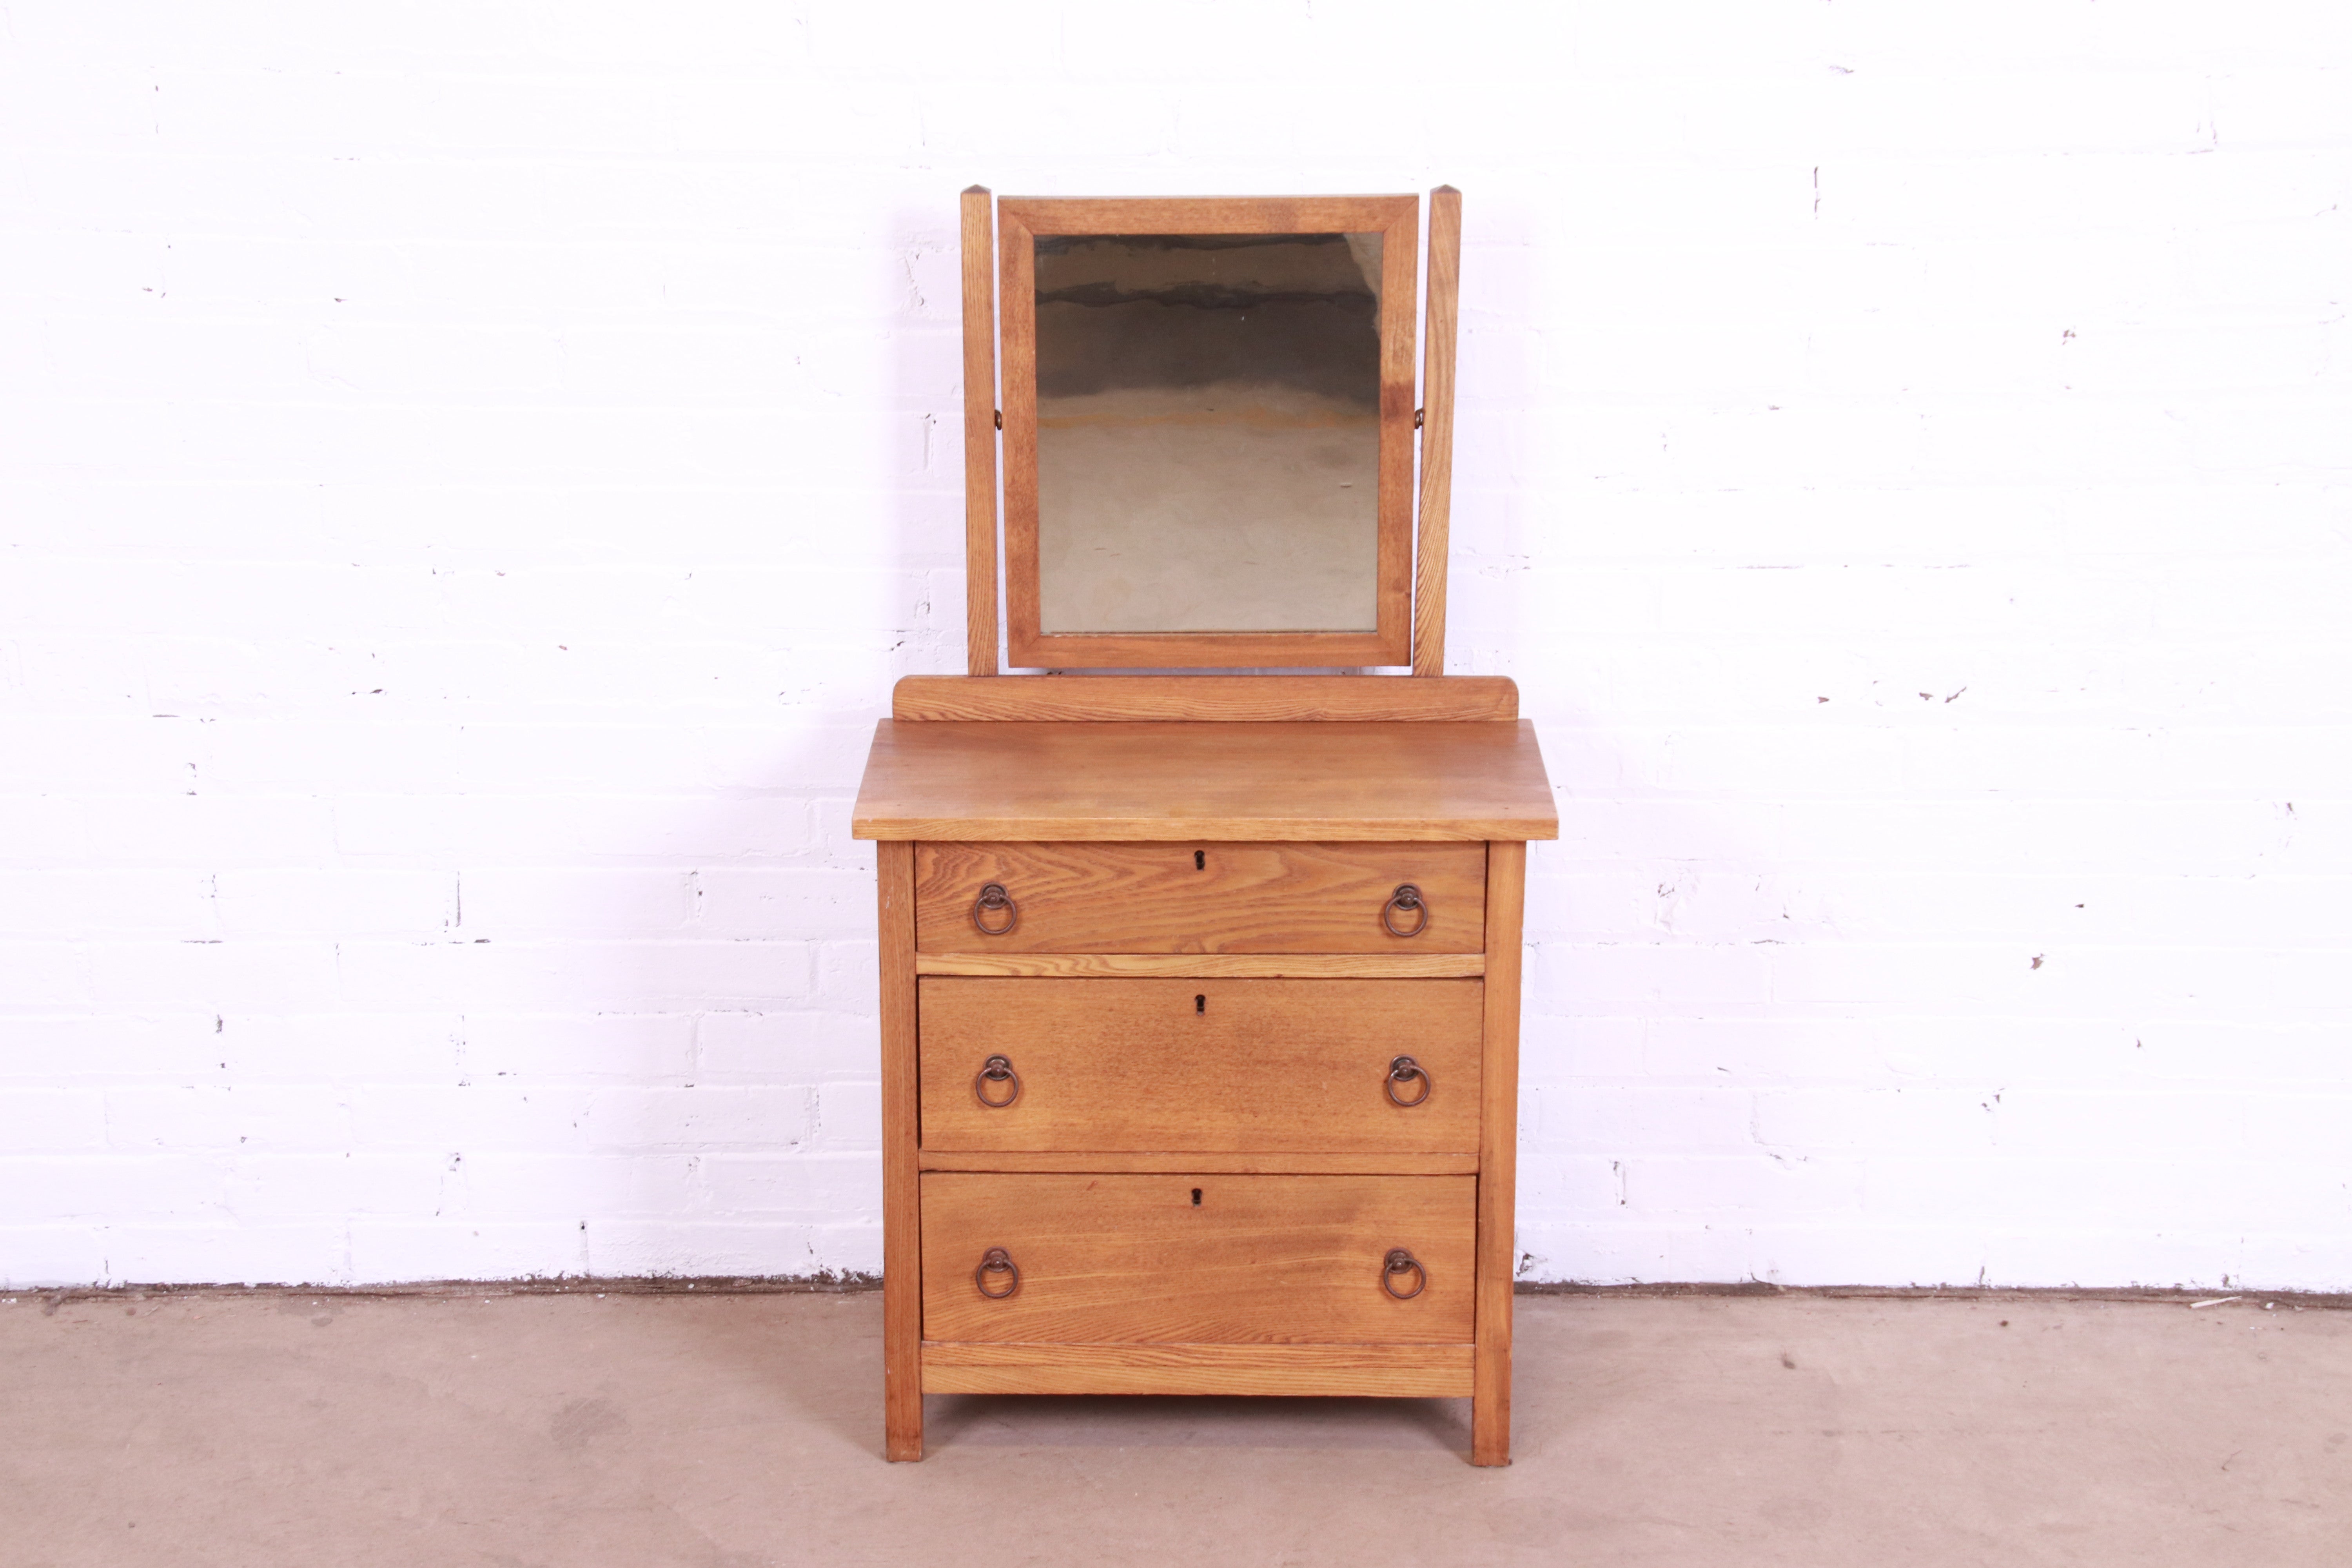 A unique antique Arts & Crafts children's oak dresser with swing mirror

In the style of Stickley

USA, Early 20th Century

Oak, with original brass hardware.

Measures: 22